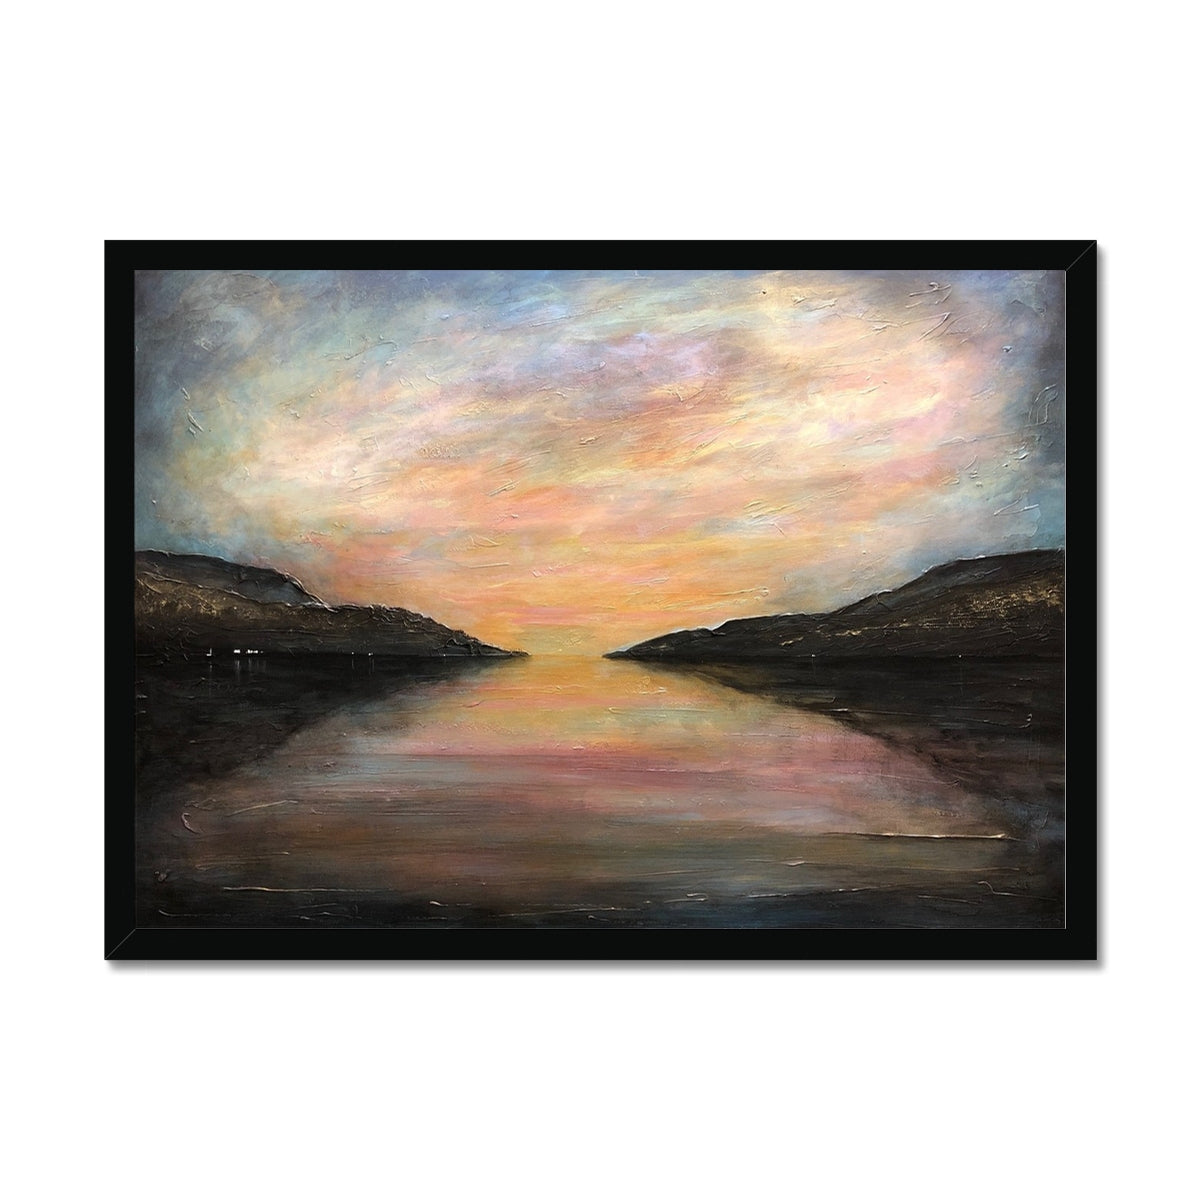 Loch Ness Glow Painting | Framed Prints From Scotland-Framed Prints-Scottish Lochs & Mountains Art Gallery-A2 Landscape-Black Frame-Paintings, Prints, Homeware, Art Gifts From Scotland By Scottish Artist Kevin Hunter